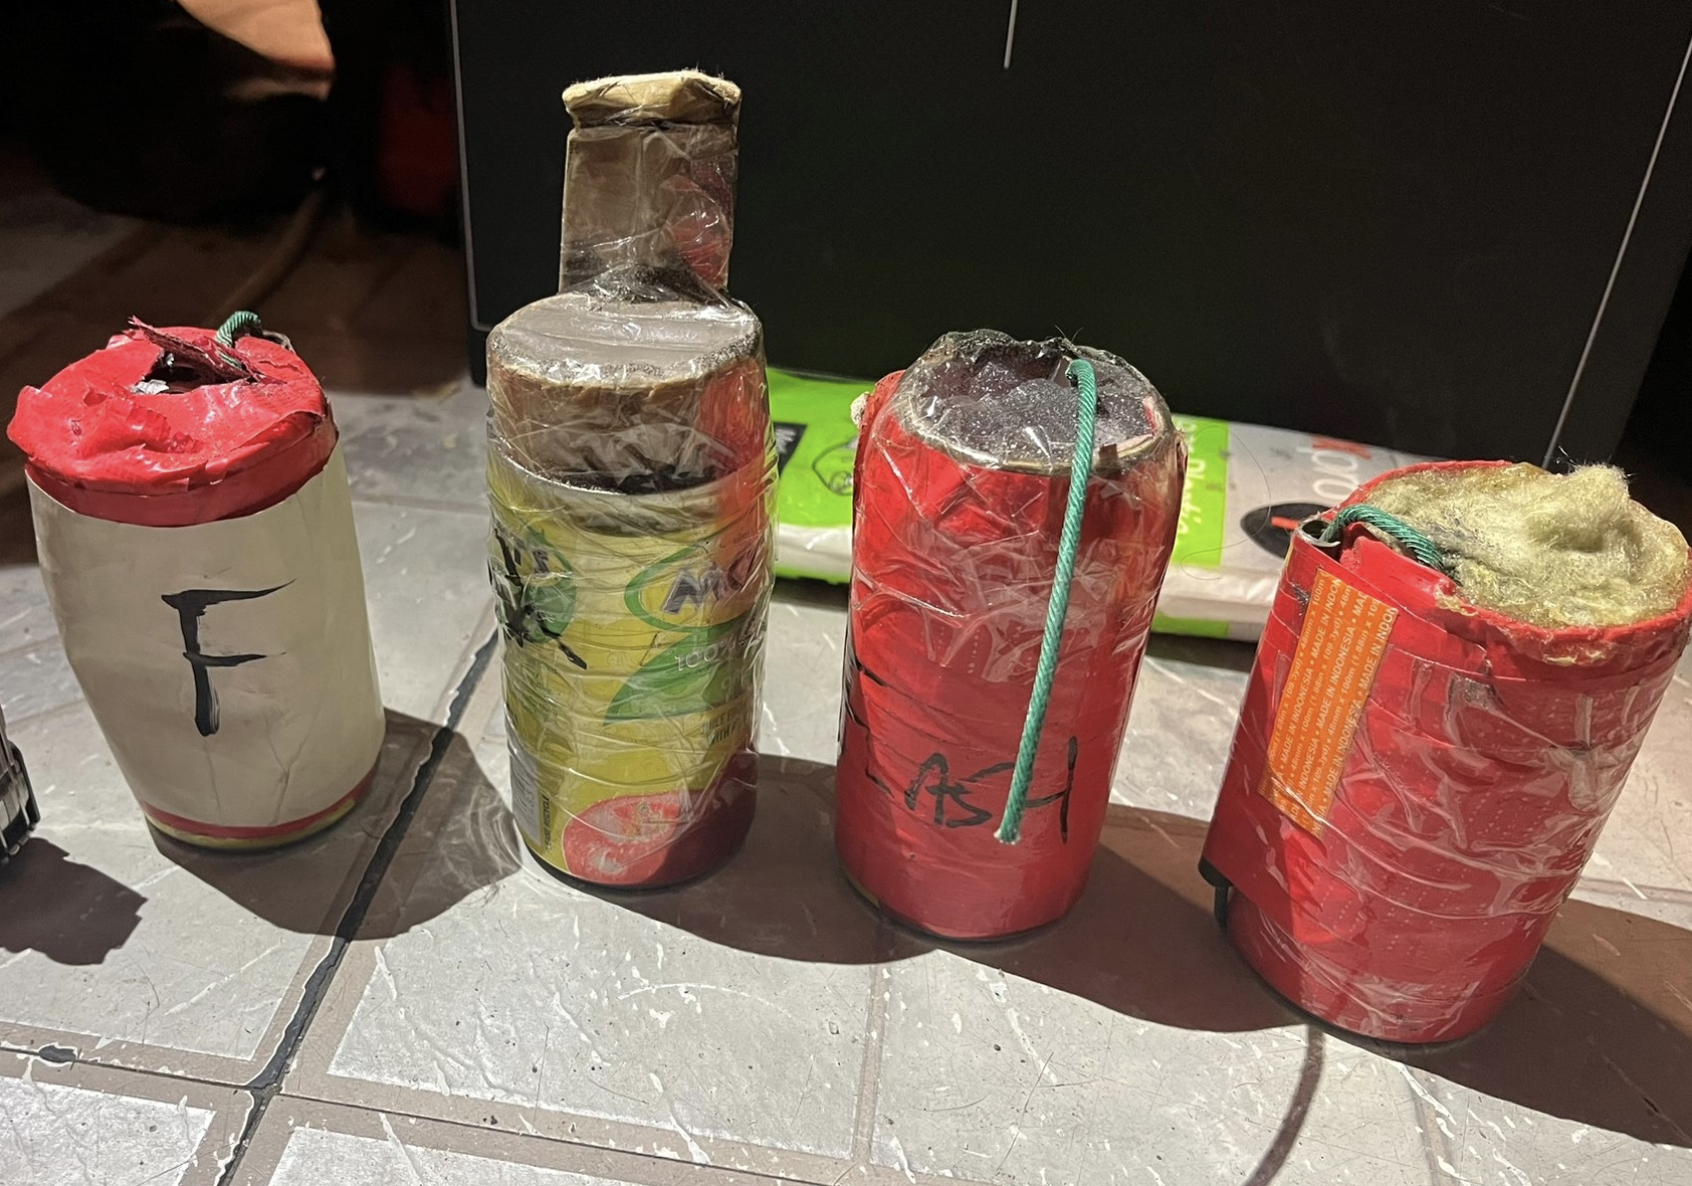 A photo of the improvised explosive devices allegedly built by two Queens brothers.